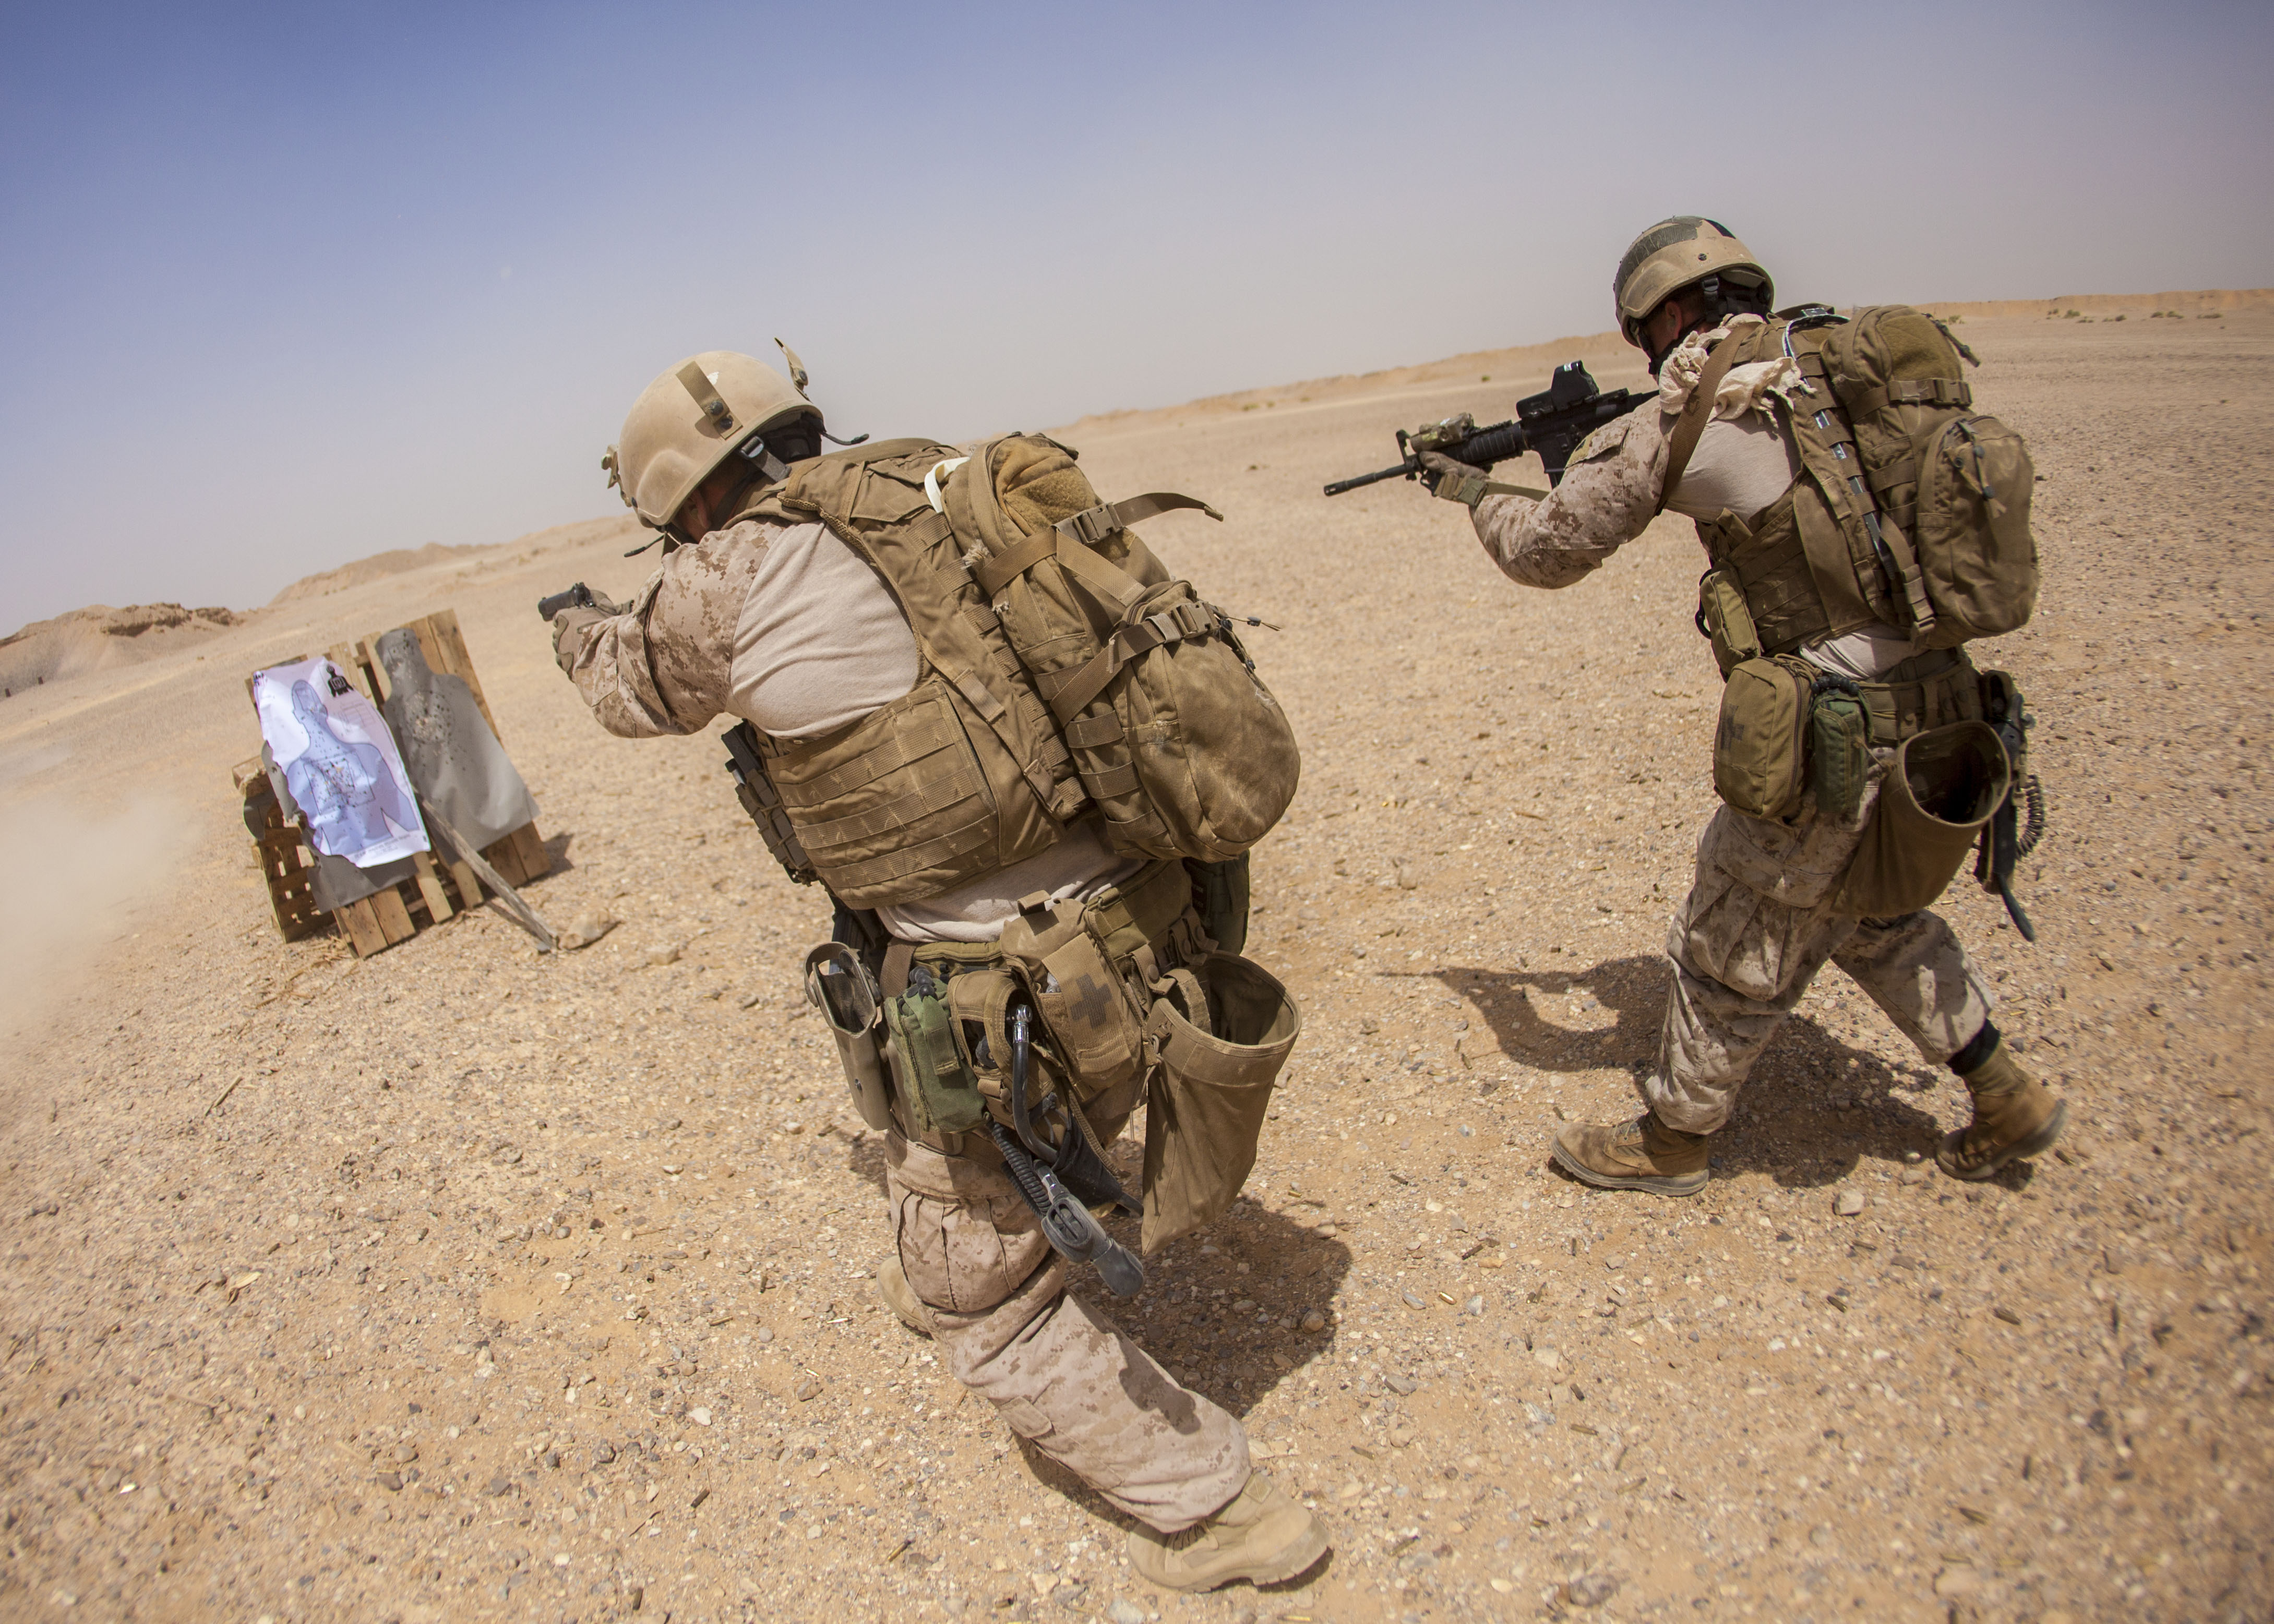 U.S._Marines_with_the_26th_Marine_Expeditionary_Unit's_maritime_raid_force_fire_an_M4_carbine_and_an_M1911_.45-caliber_pistol_at_a_range_in_Jordan_June_9,_2013,_during_exercise_Eager_Lion_2013_130609-M-SO289-022.jpg